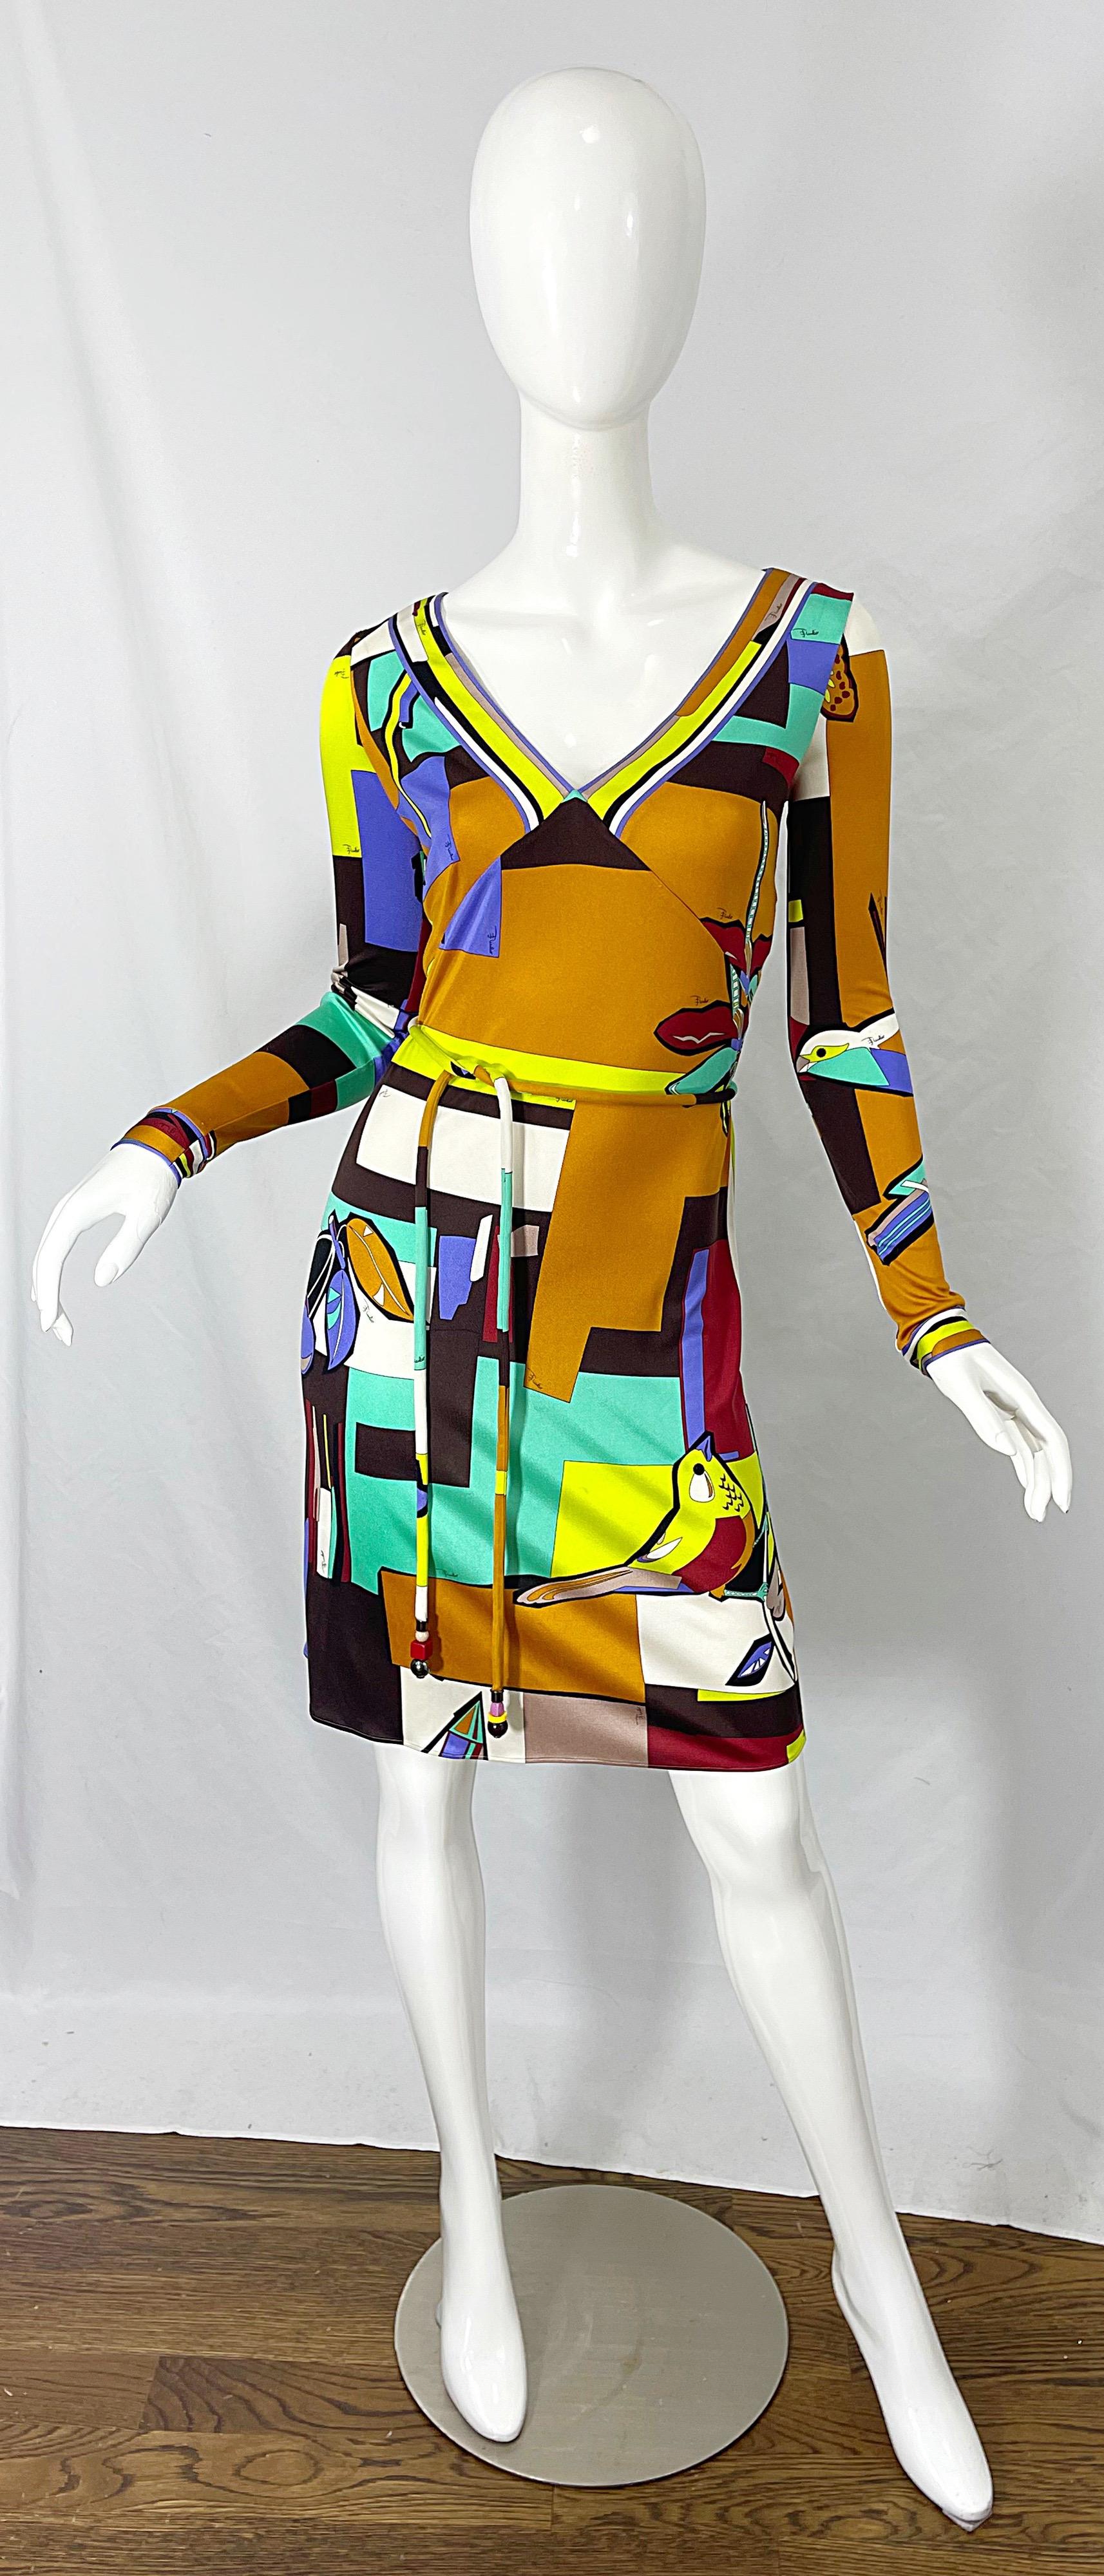 Amazing 1990s EMILIO PUCCI novelty bird, butterfly, and dragonfly print silk jersey long sleeve belted dress ! Features a tailored v-neck bodice with a slinky skirt. Vibrant colors of turquoise blue, purple, neon green, white, black and terra cotta.